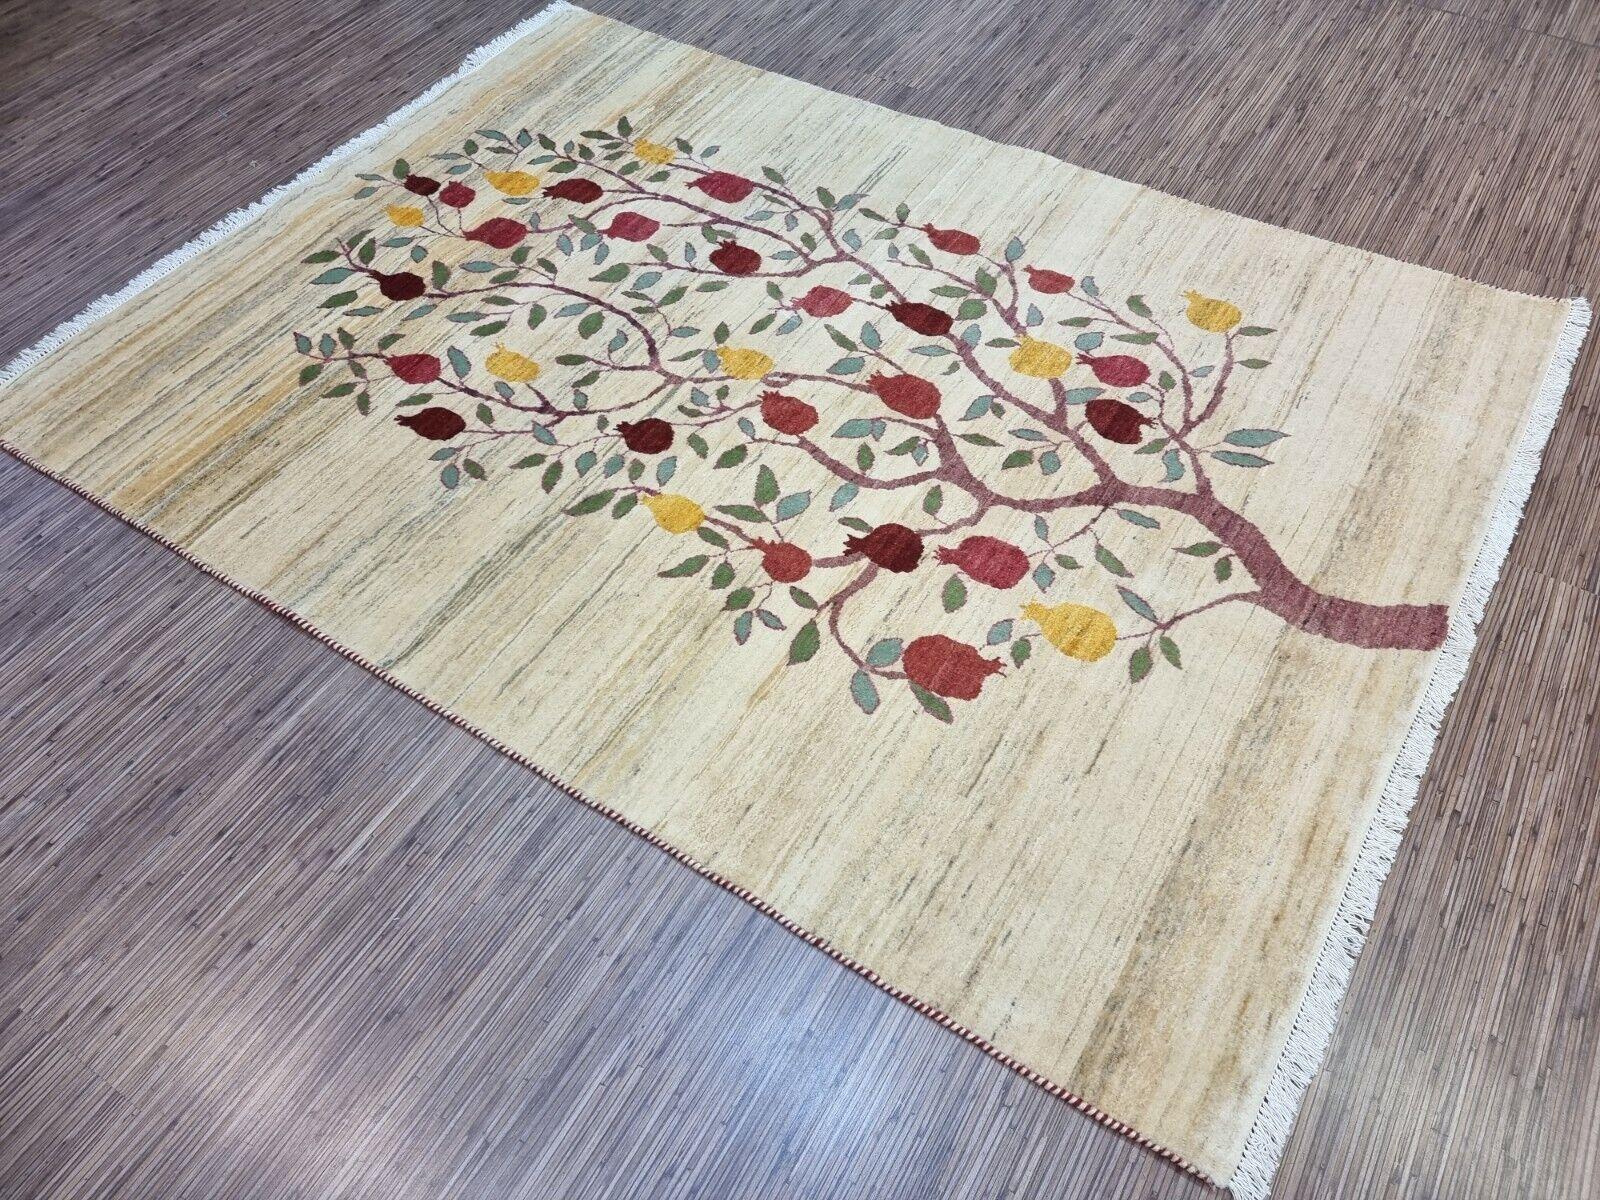 Bring home a piece of history and art with this Handmade Vintage Persian Style Gabbeh Rug. This stunning rug from the 1970s is in good condition, featuring a unique and intricate design of a fruit-bearing tree.

The rug has a cream-colored